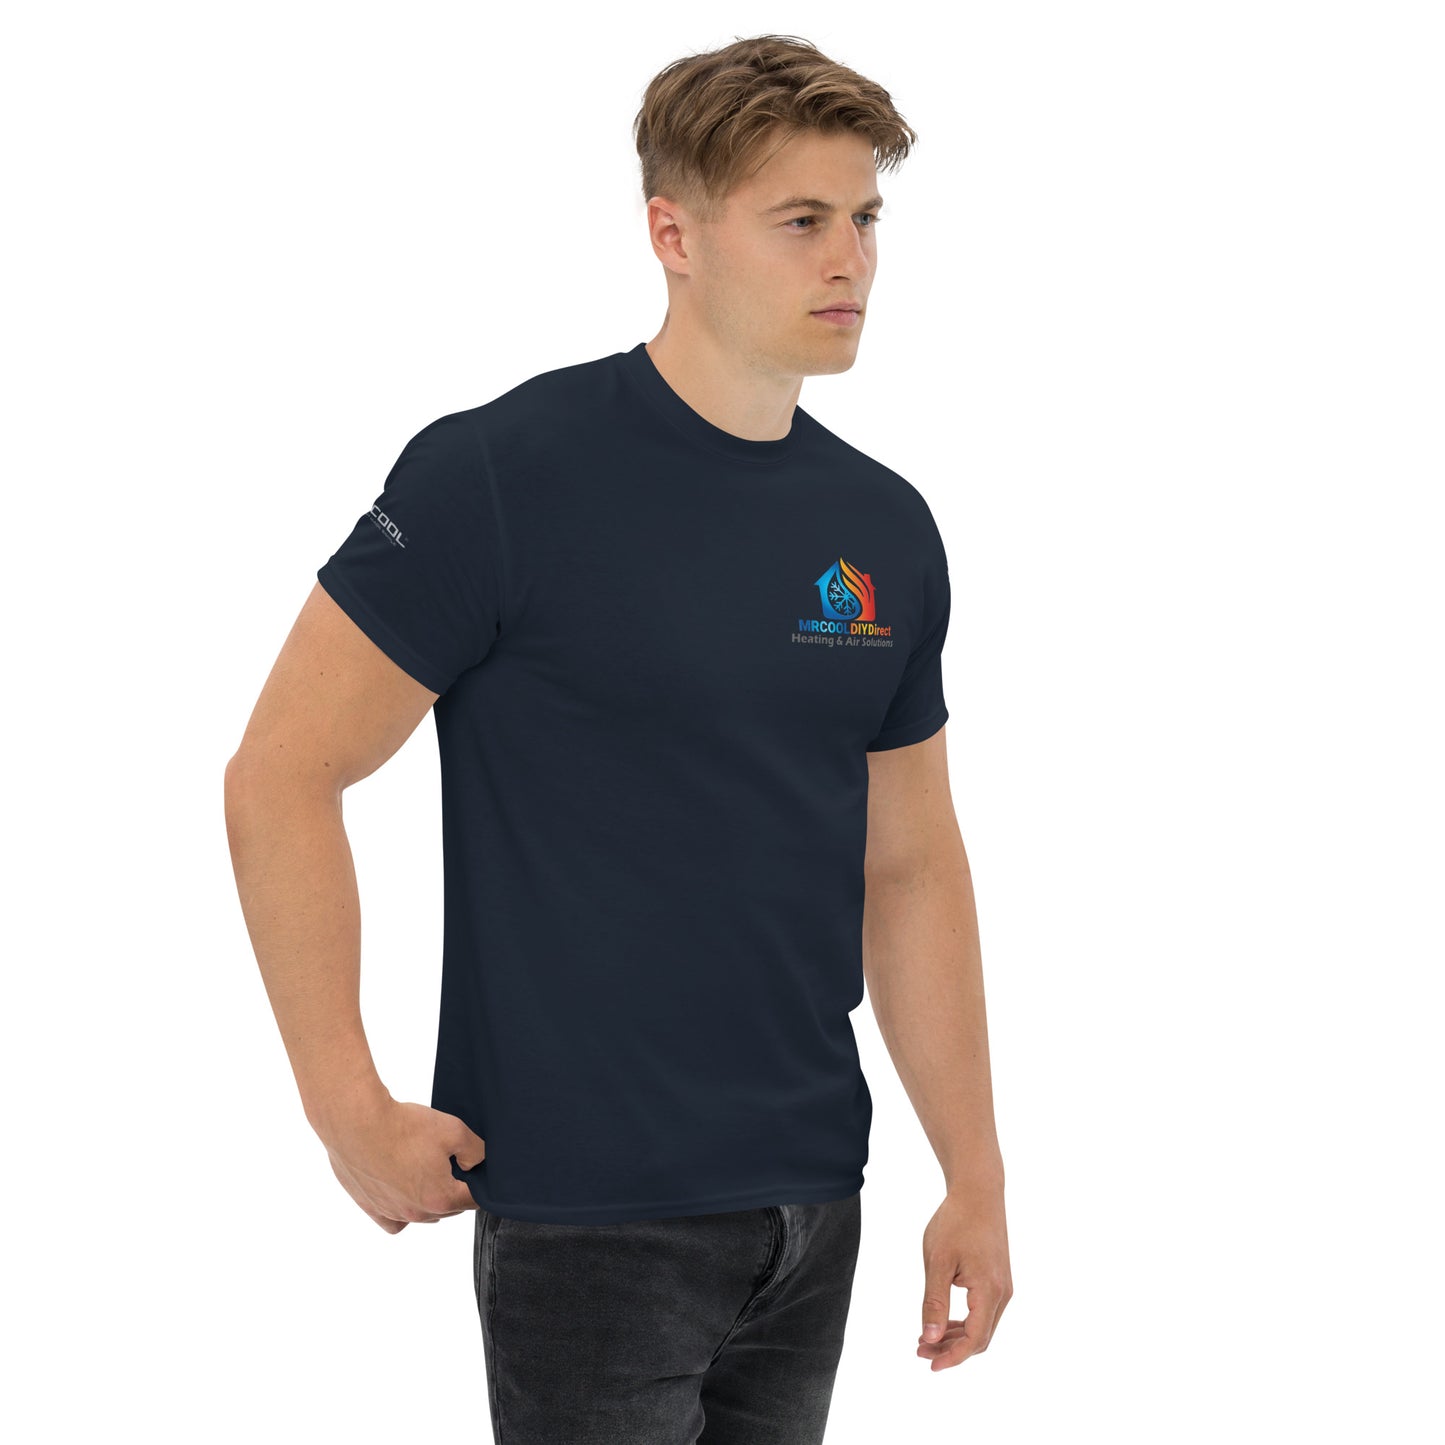 A young man wearing a dark blue Exclusive HVAC-Themed Custom Tee by MRCOOL DIY Direct, with a small logo on the left chest area, standing against a plain white background, looking slightly to the side.